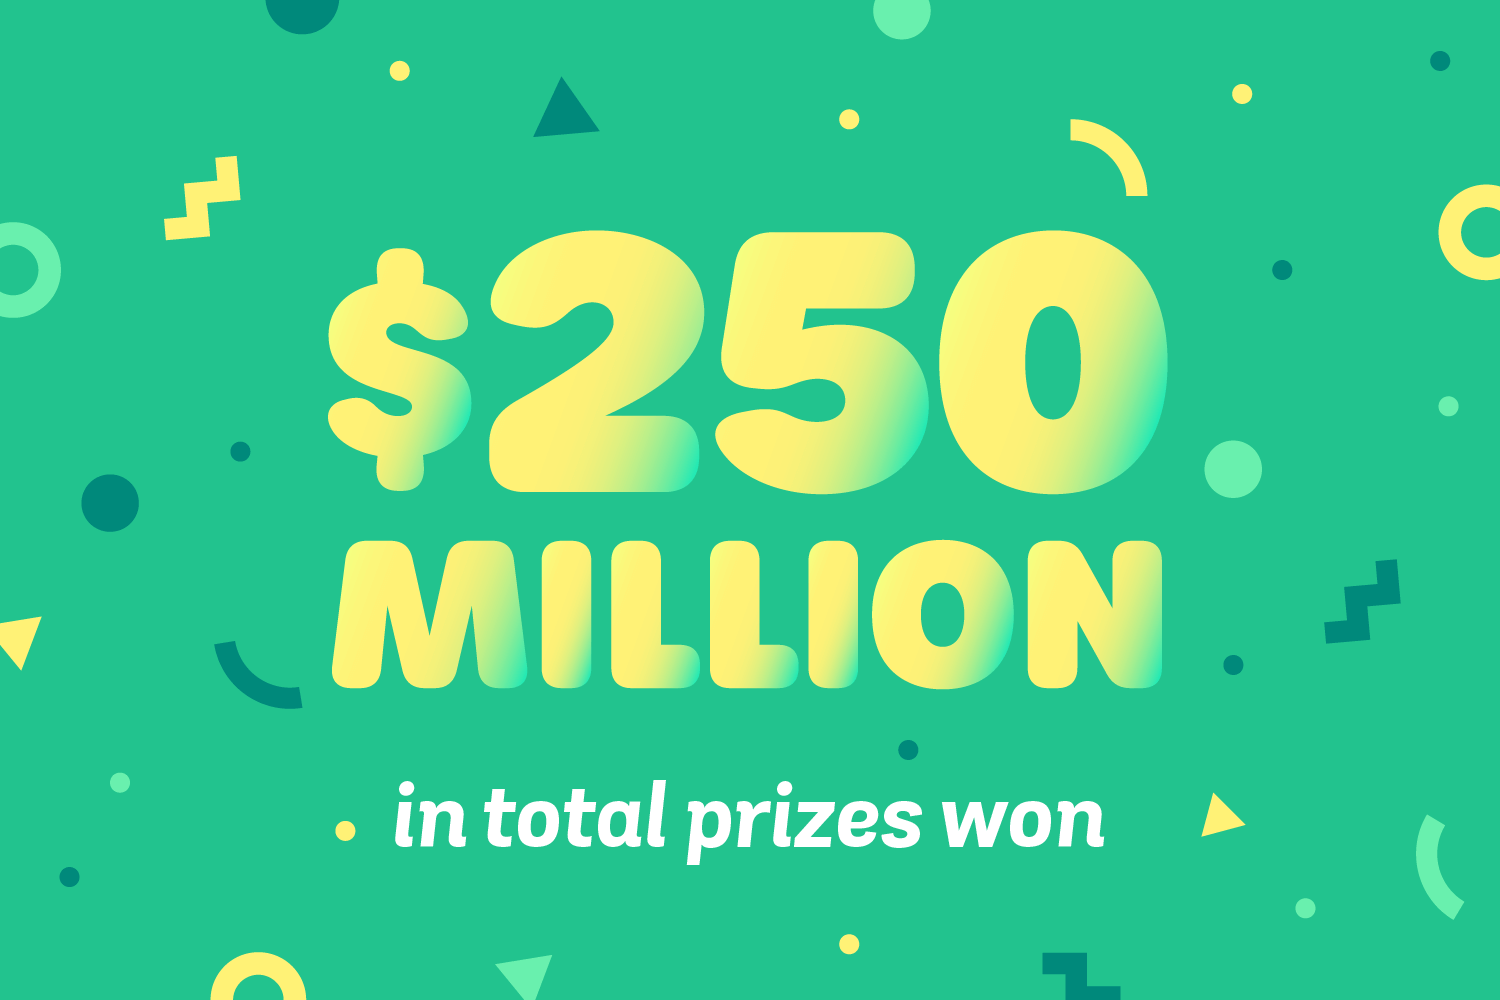 $250 million in total lottery prizes won